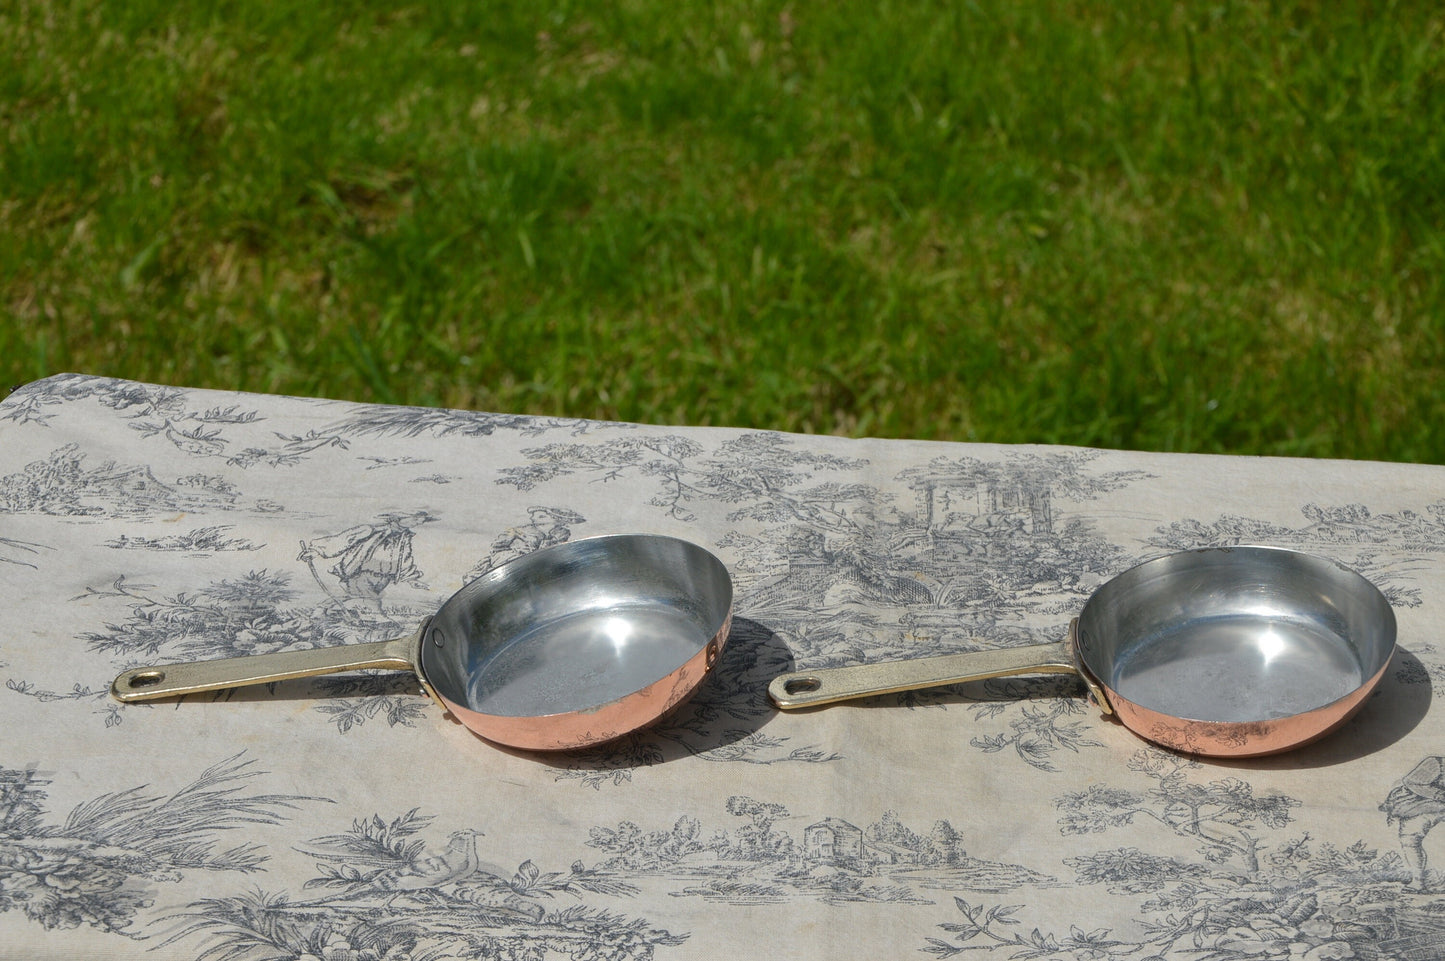 Mini Decorative Vintage French Copper Small Saute Fry Pans Made in Villedieu Vintage French Copper Bronze Handle Two Individual Egg Pans